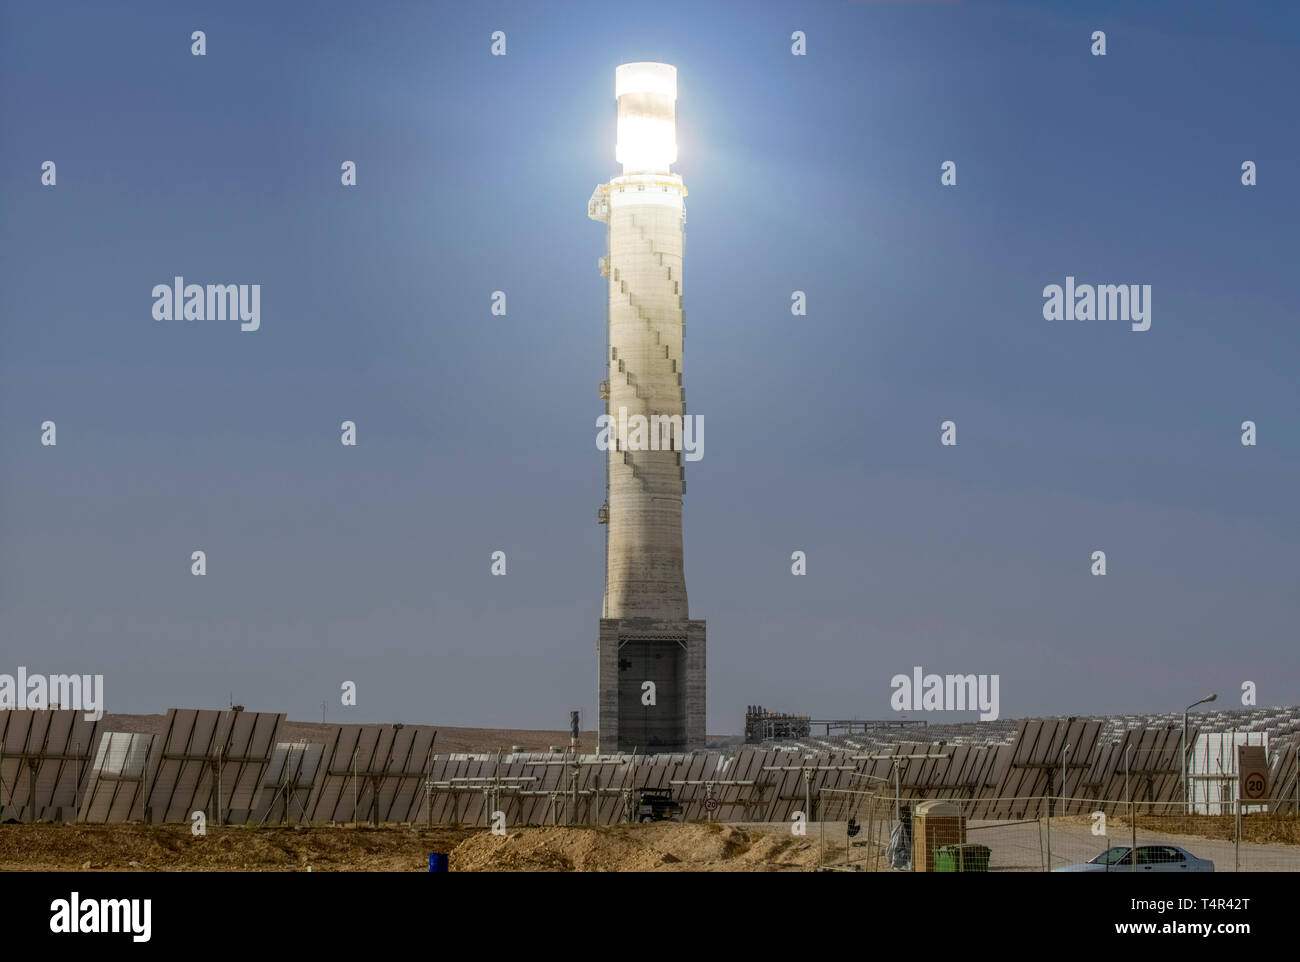 The Ashalim Solar Power station is a solar thermal power station in the Negev desert near the kibbutz Ashalim, in Israel. The station will provide 121 Stock Photo